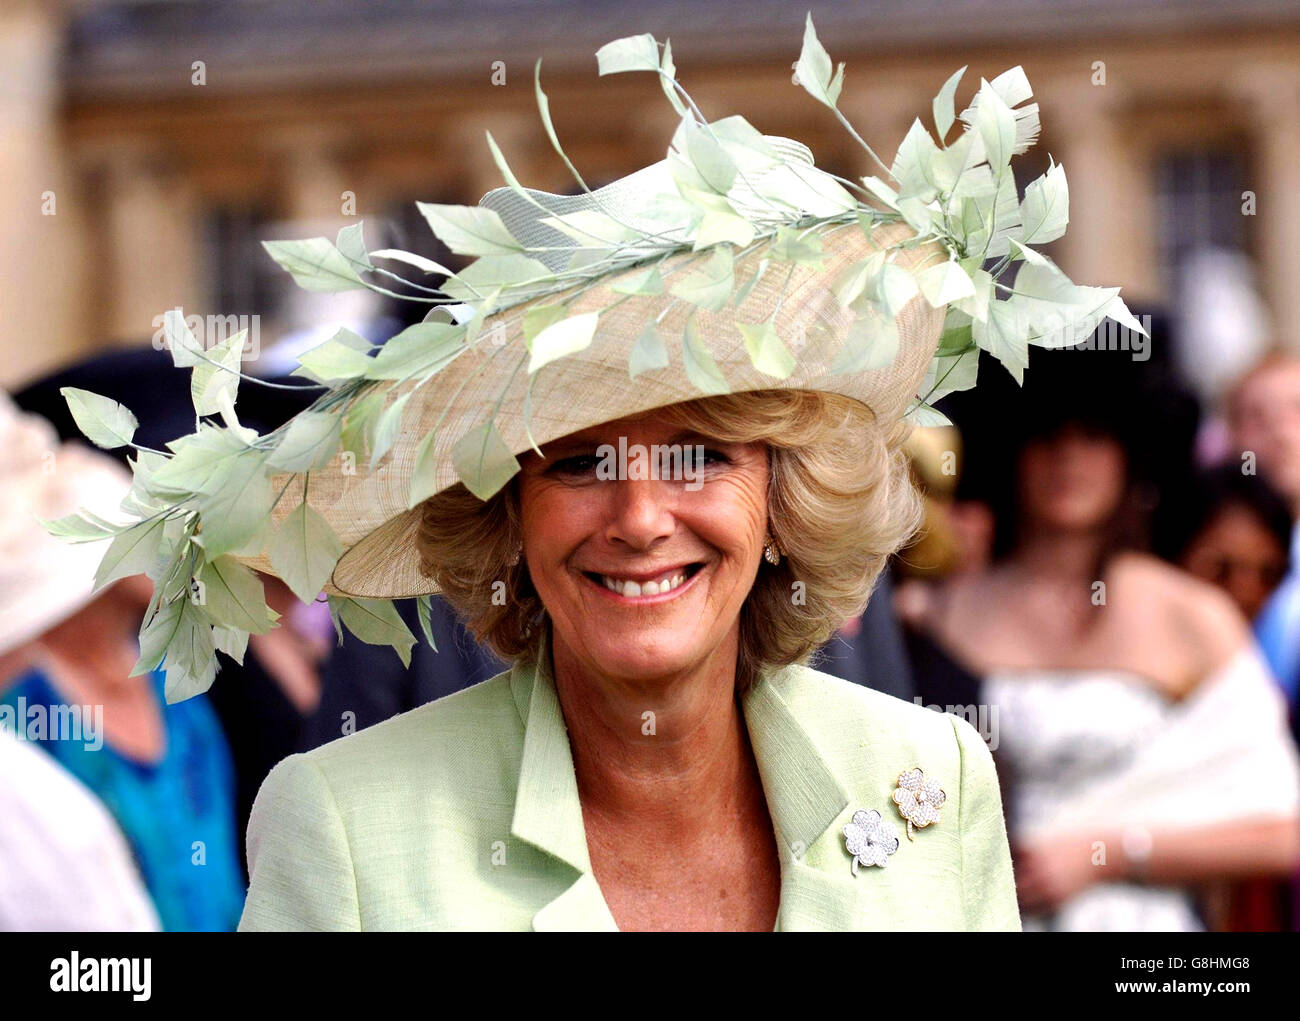 The Duchess of Cornwall attends her first garden party since her marriage to the Prince of Wales. Camilla is wearing a hat by Irish milliner Philip Treacy. Stock Photo